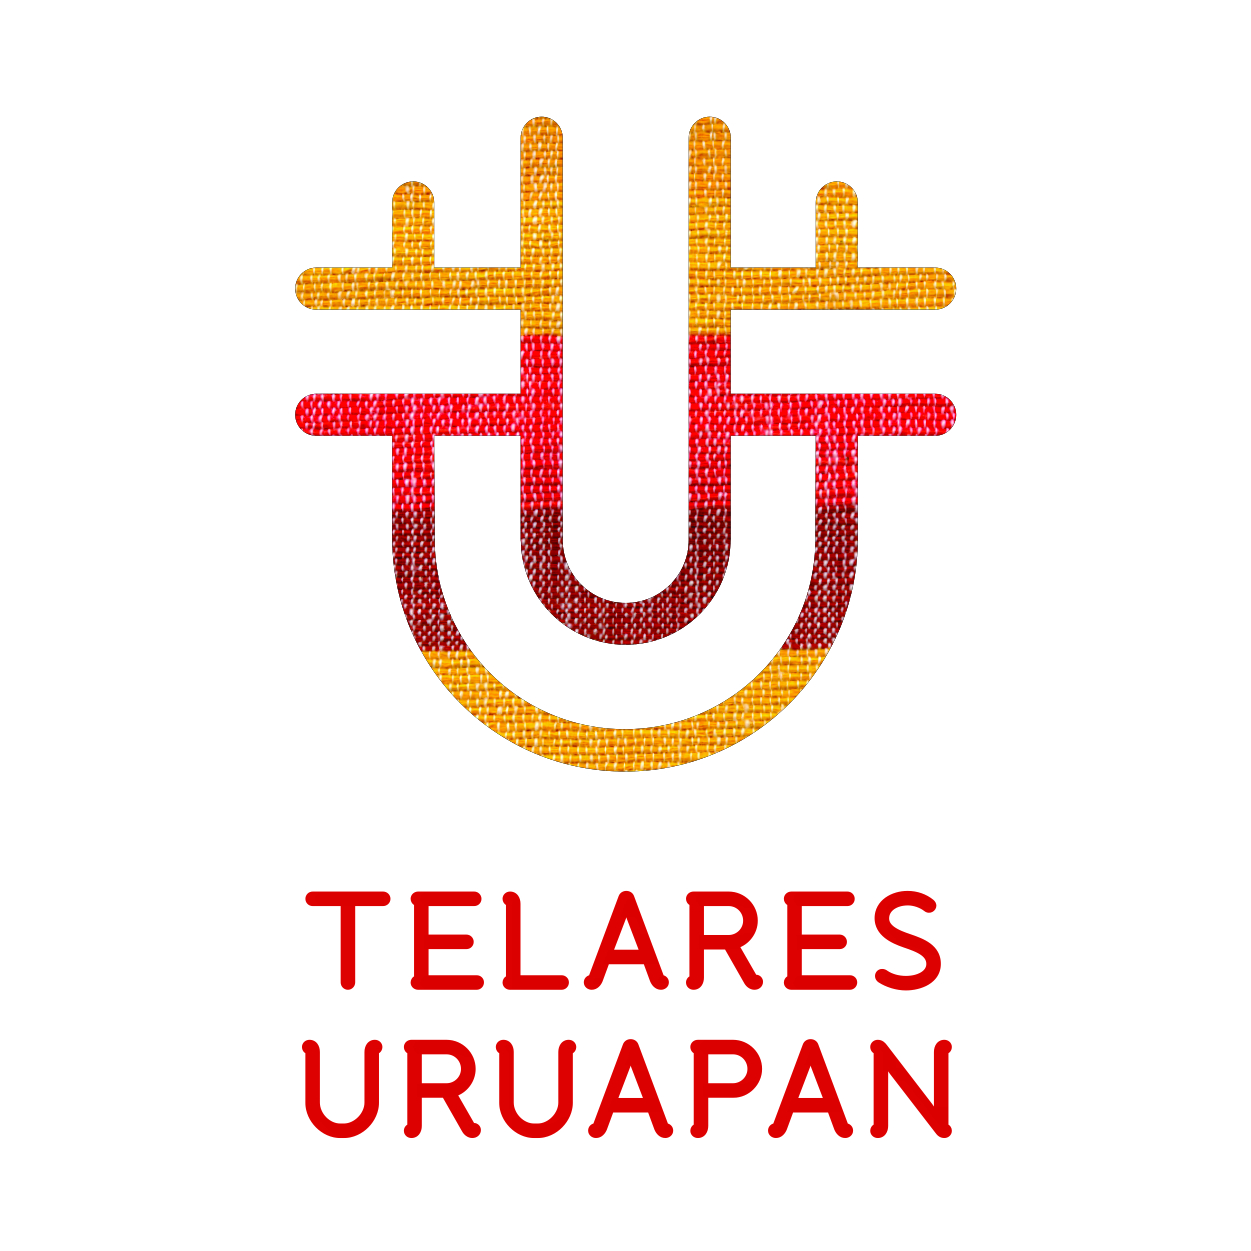 telares uruapan logo design by logo designer KENNETH DISENO for your inspiration and for the worlds largest logo competition